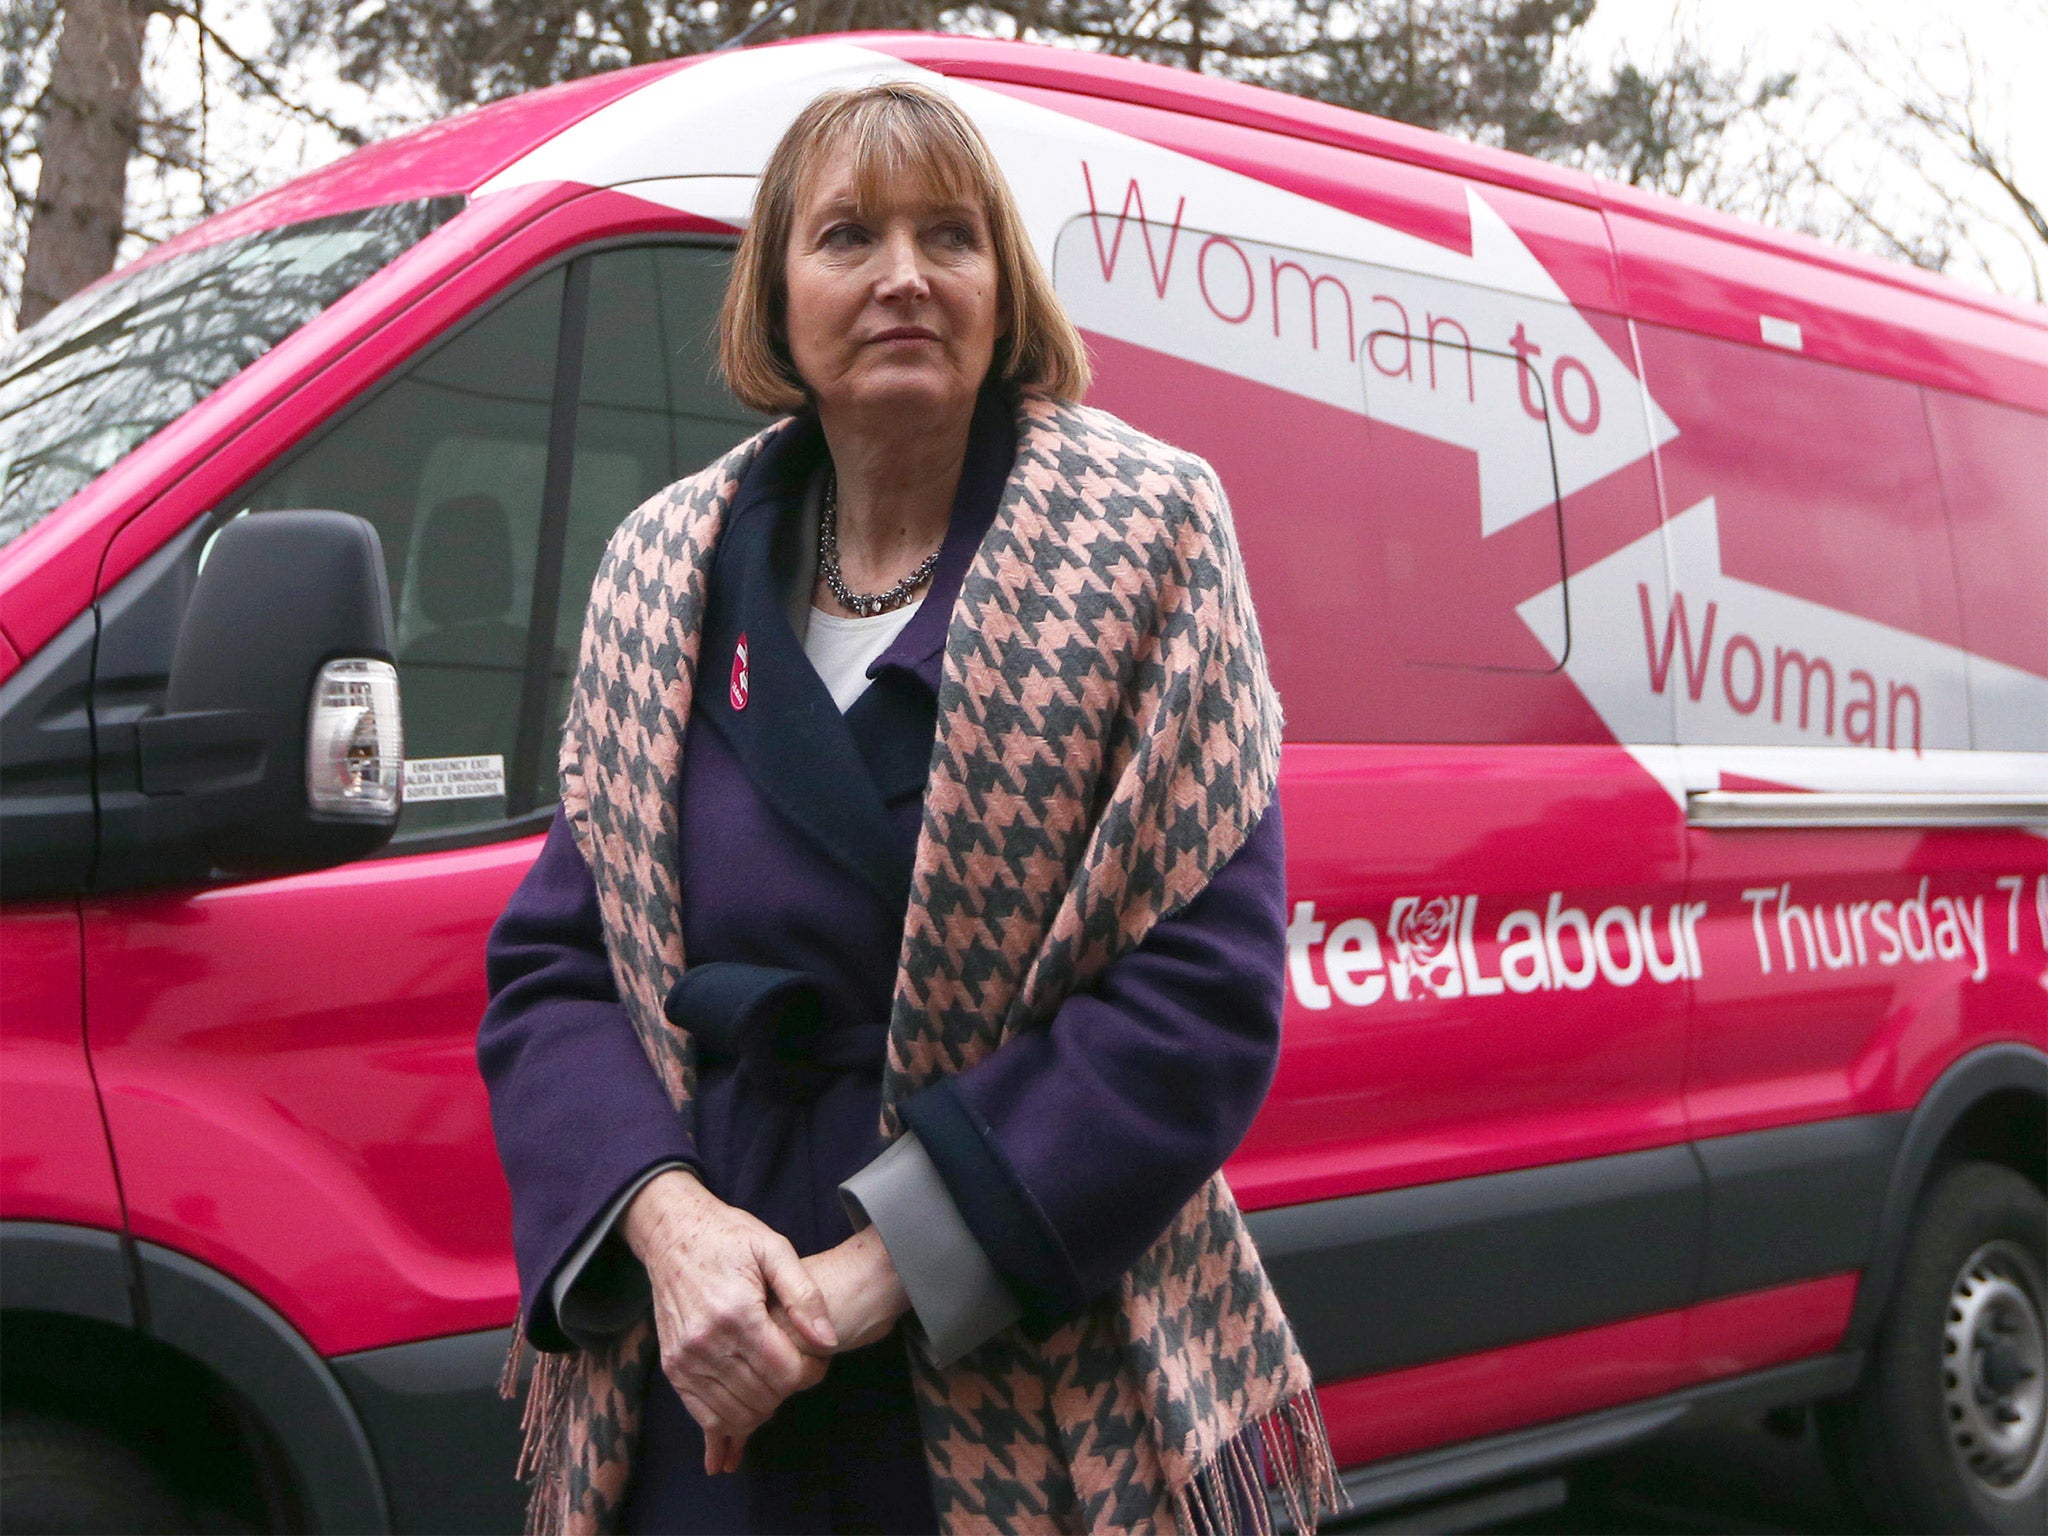 Harriet Harman, the deputy Labour leader, said she thought the bus was ‘very eye-catching’